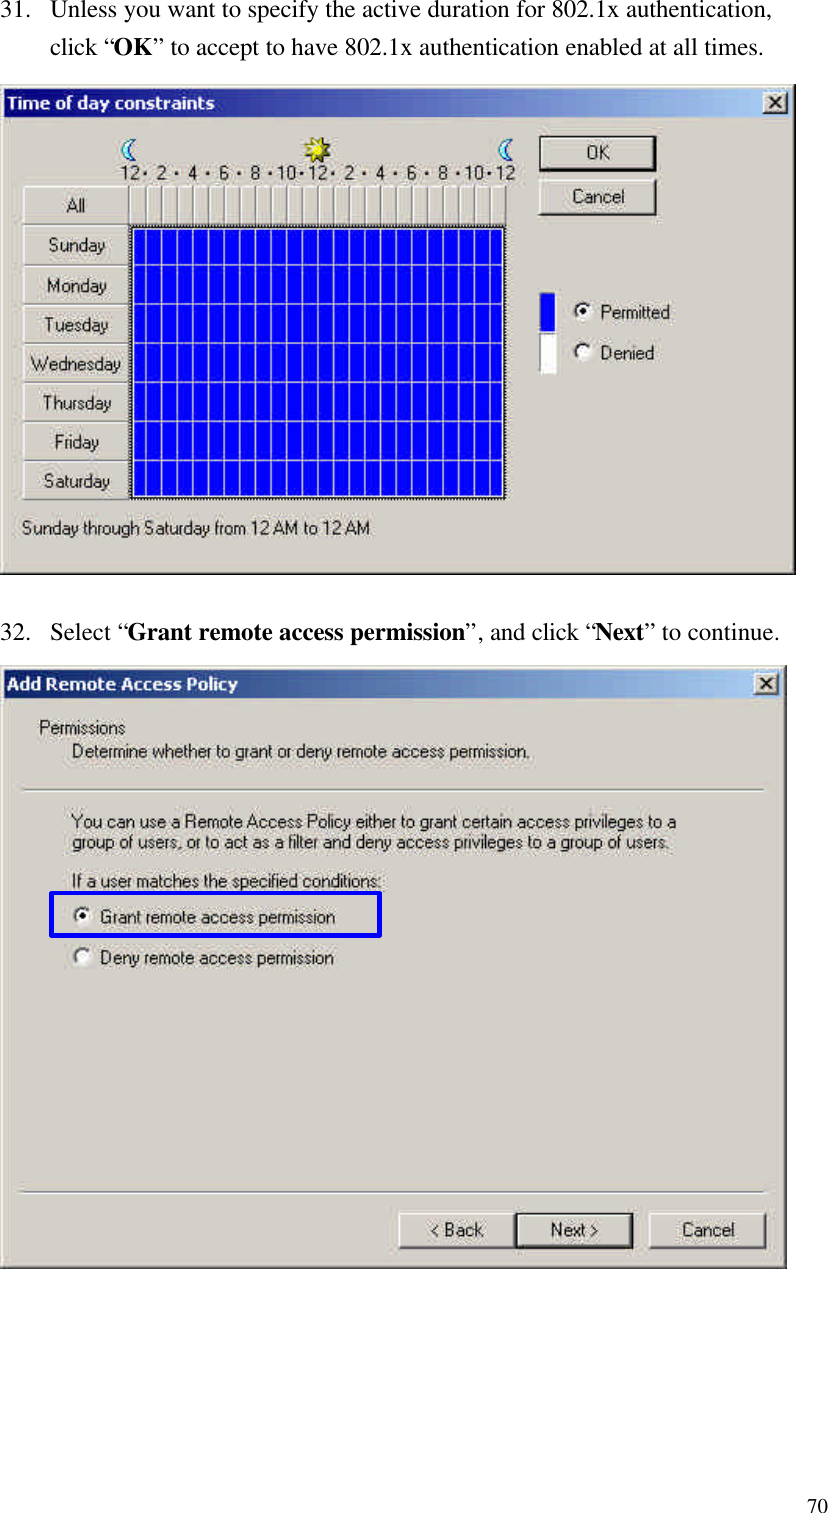  7031. Unless you want to specify the active duration for 802.1x authentication, click “OK” to accept to have 802.1x authentication enabled at all times.  32. Select “Grant remote access permission”, and click “Next” to continue.                      